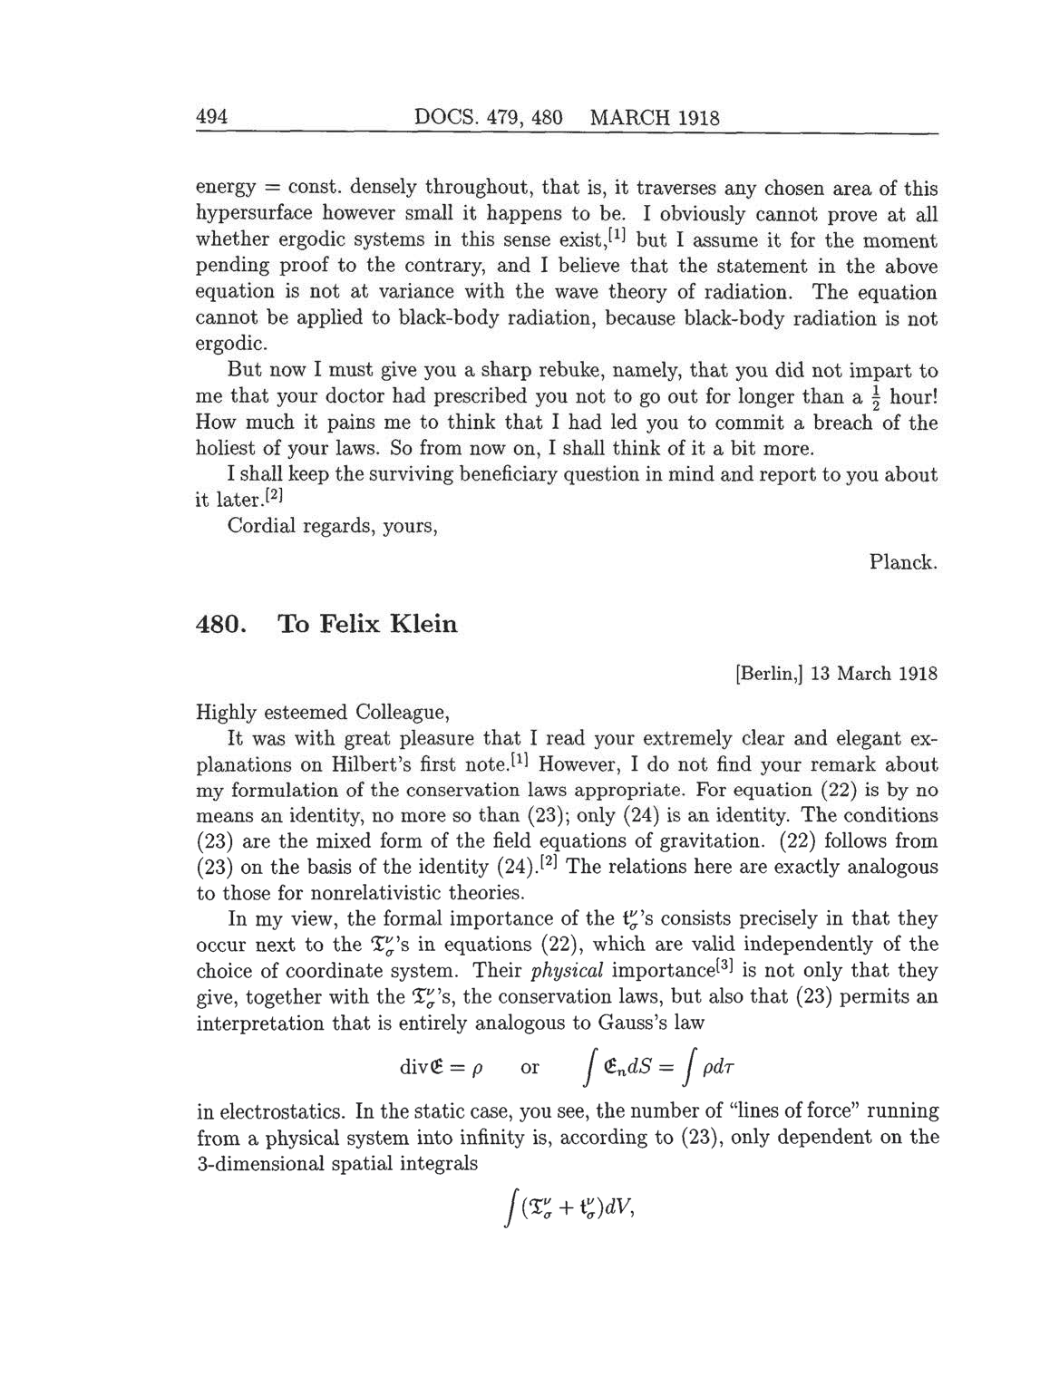 Volume 8: The Berlin Years: Correspondence, 1914-1918 (English translation supplement) page 494